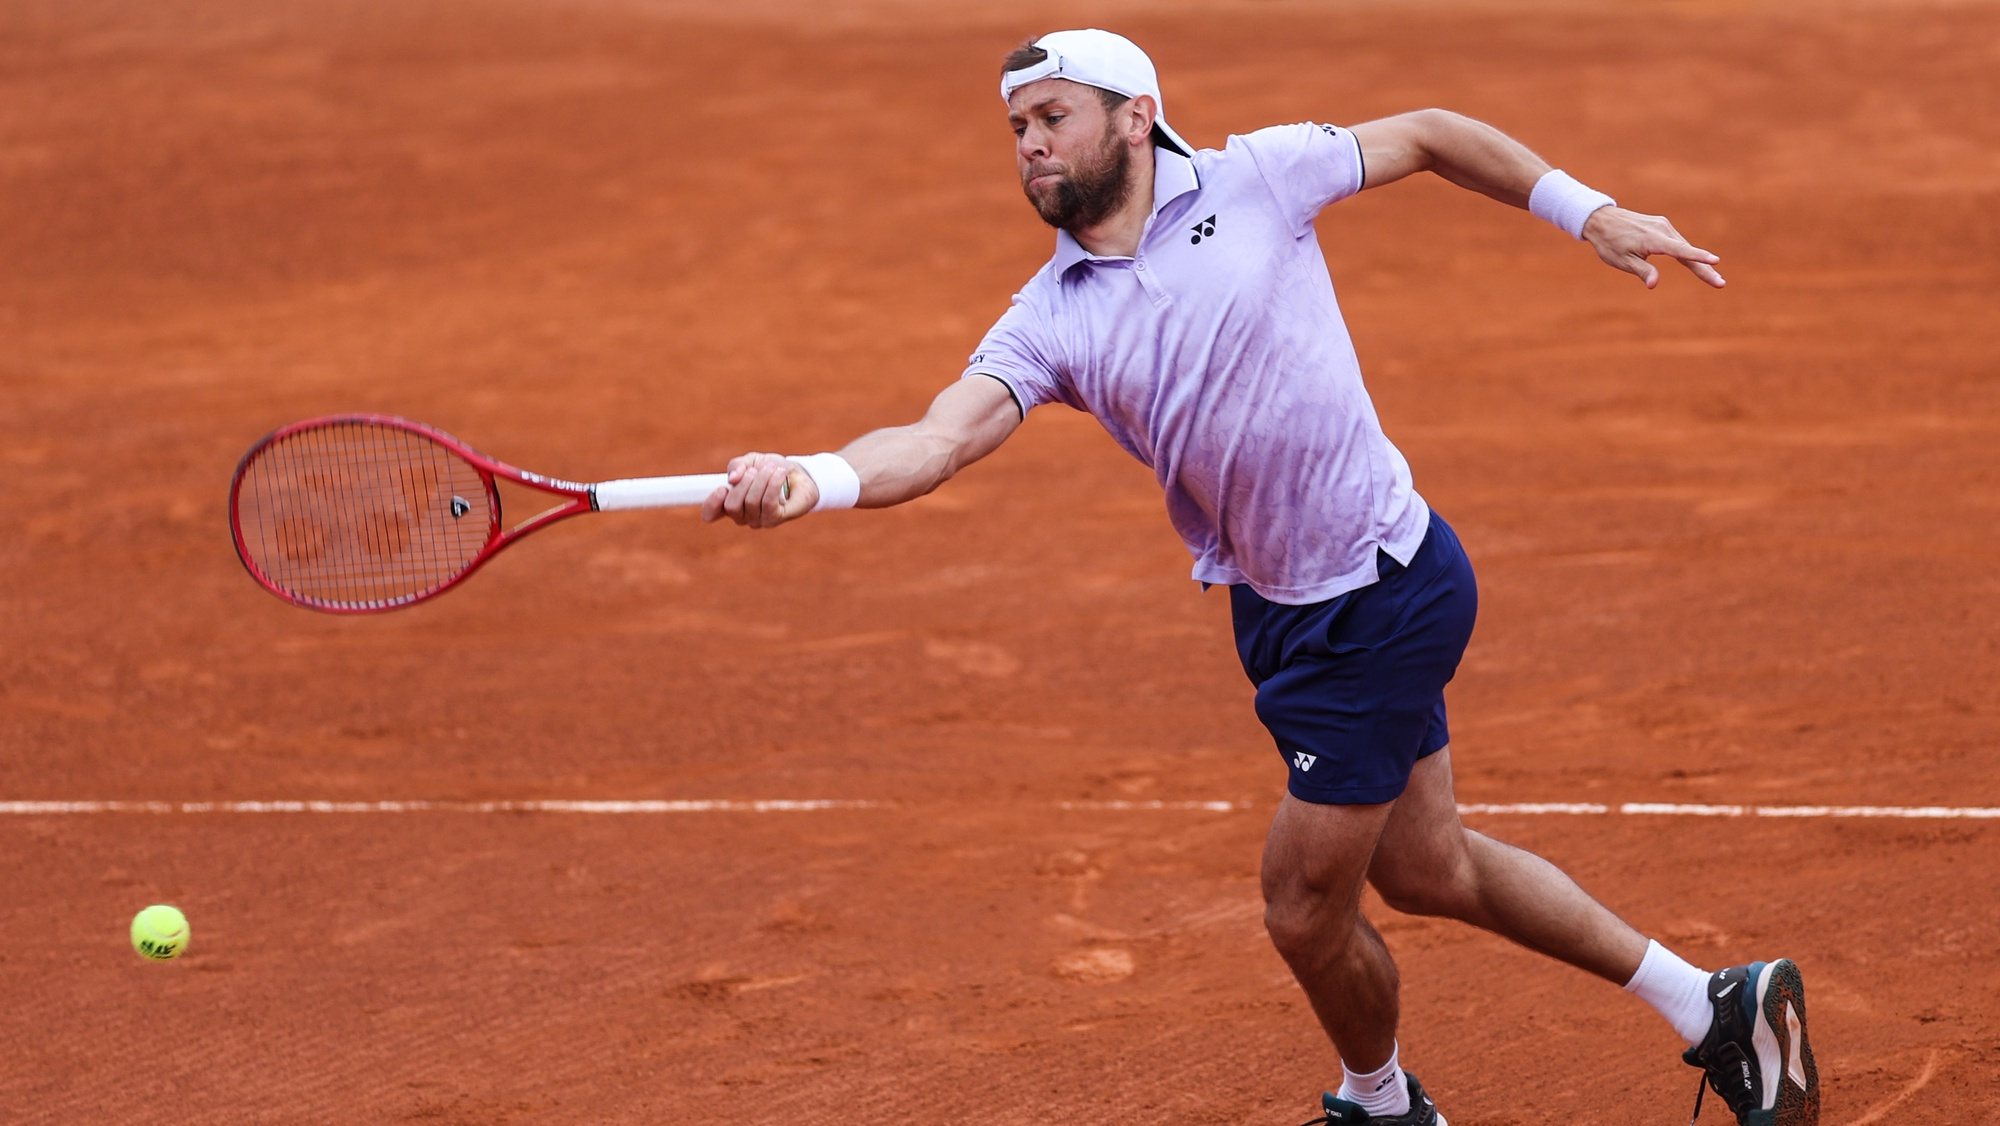 Radu Albot from Moldova in action against Sebastian Baez from Argentina in the round of 32 match at the Estoril Open Tennis tournament in Estoril, on the outskirts of Lisbon, Portugal, 03 of April 2023. MIGUEL A. LOPES/LUSA